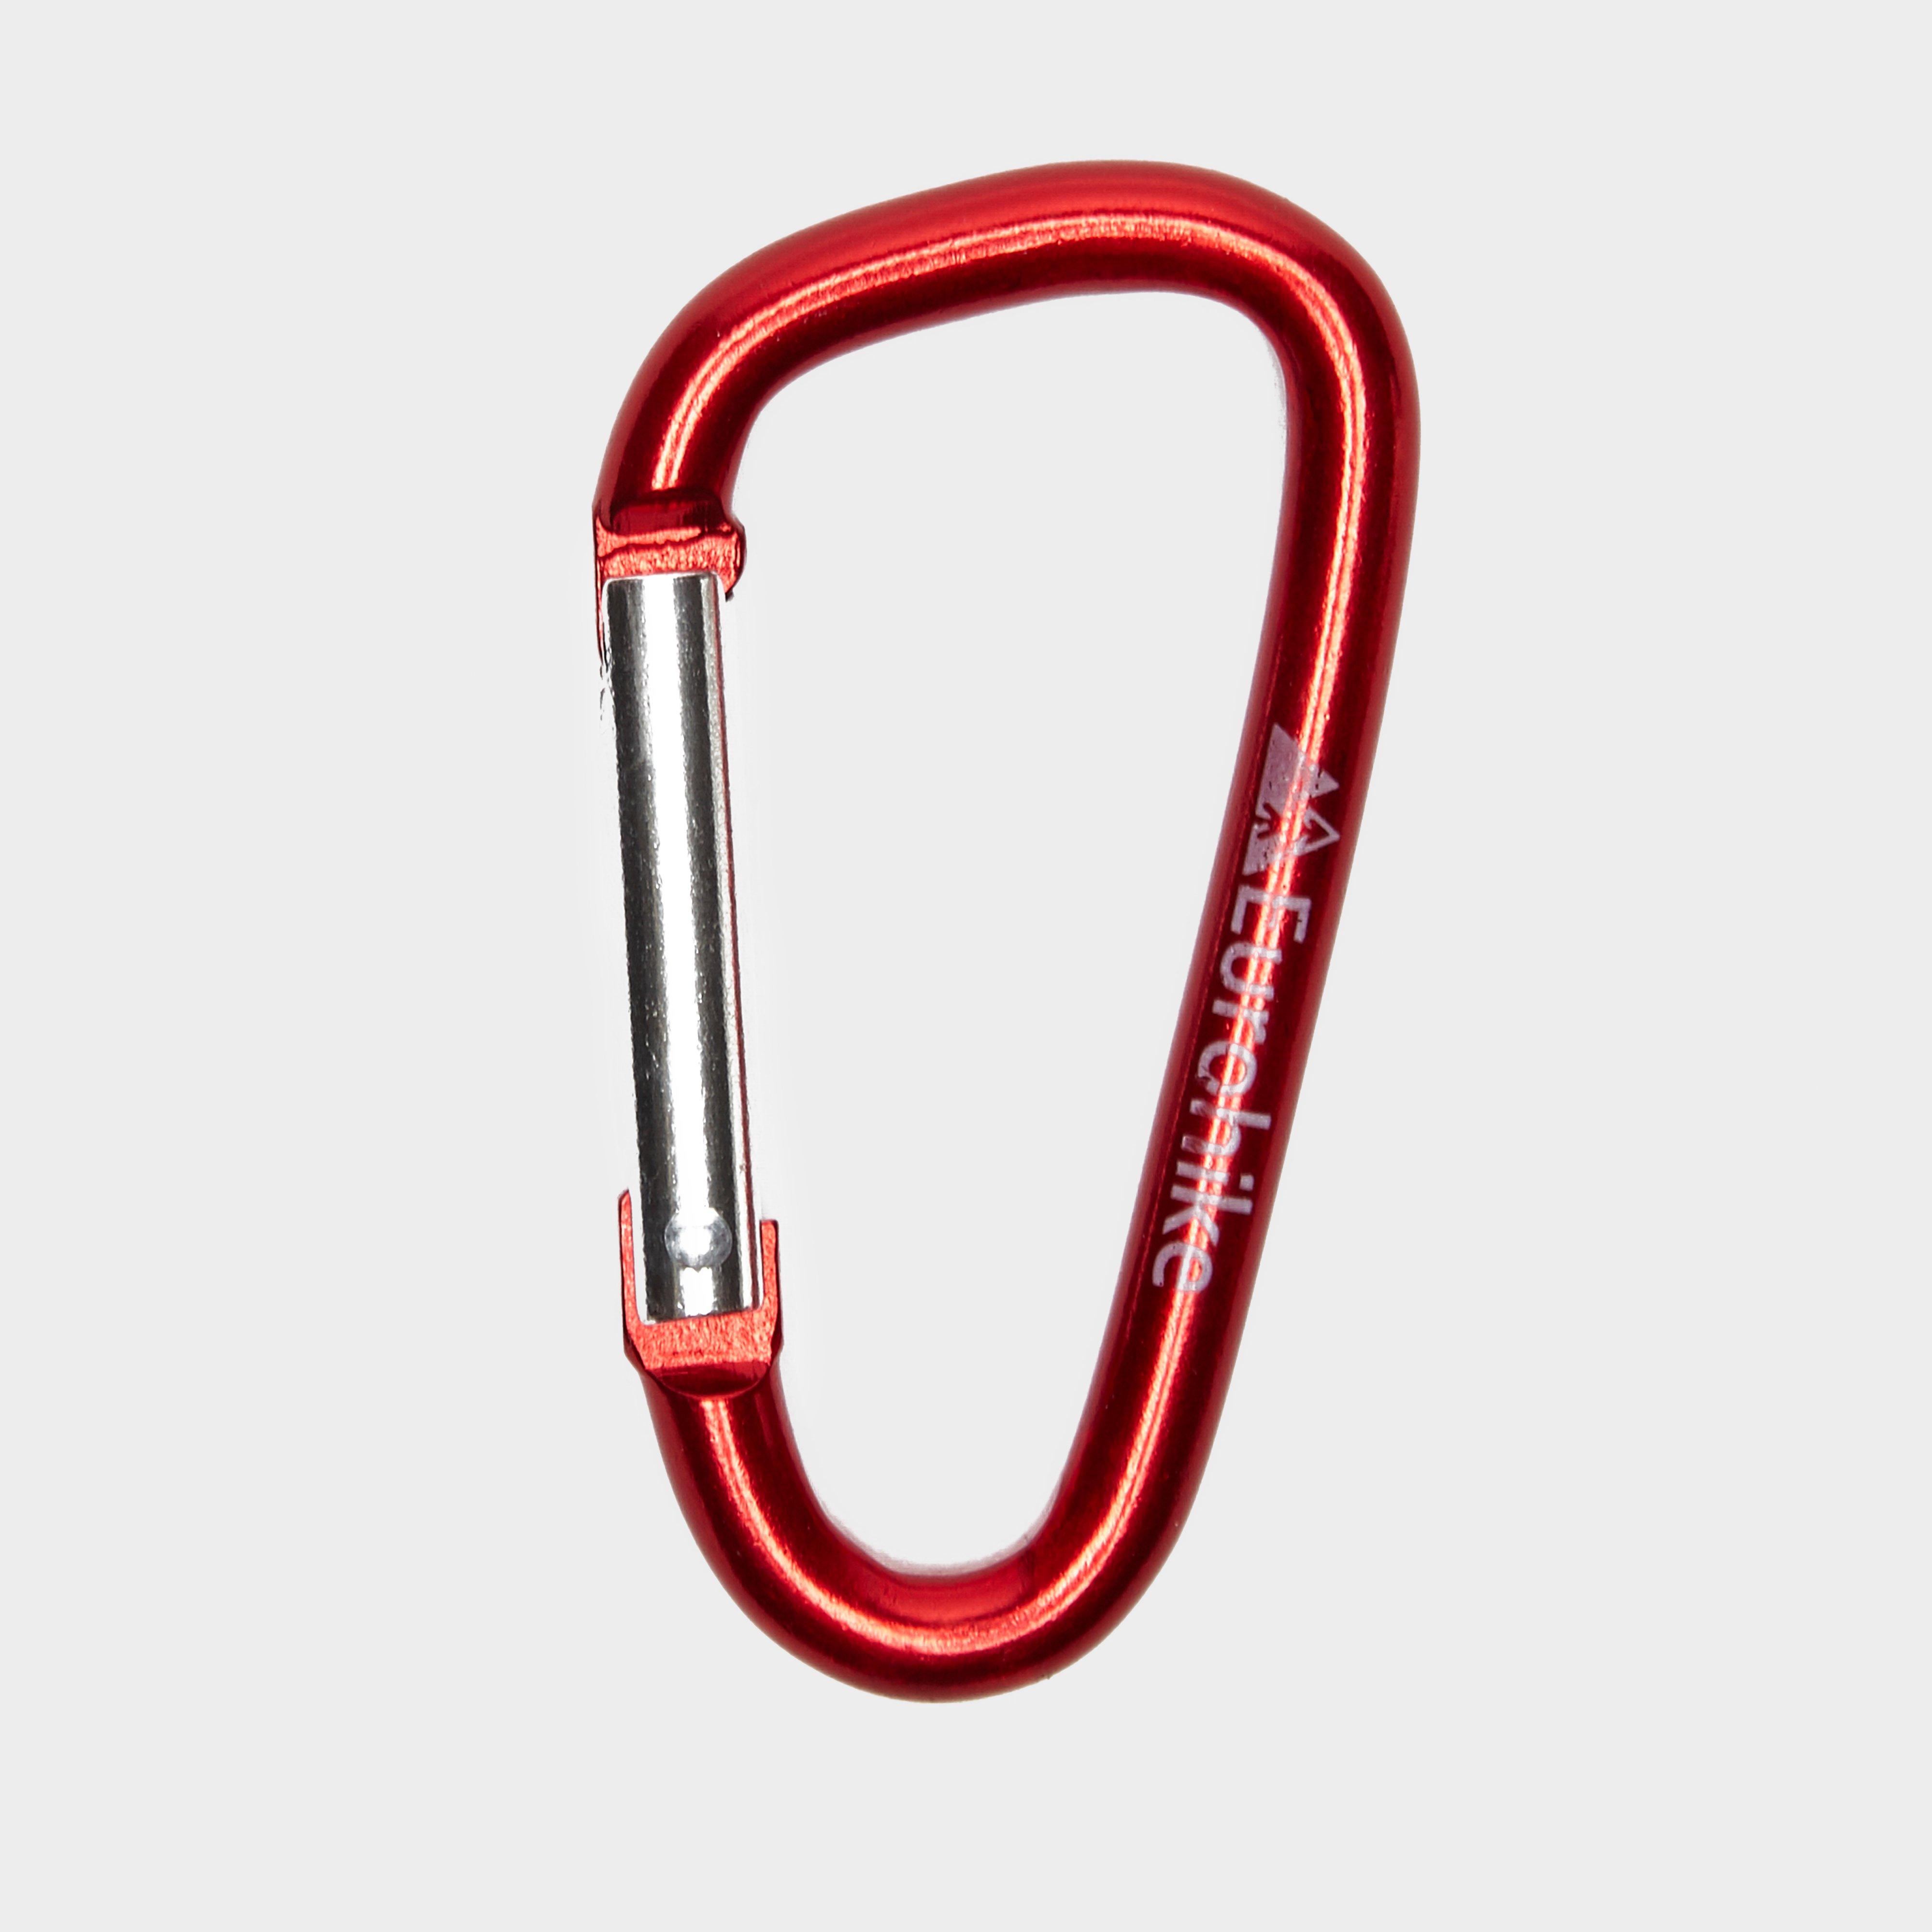 Photos - Other goods for tourism Eurohike Carabiner, Red 